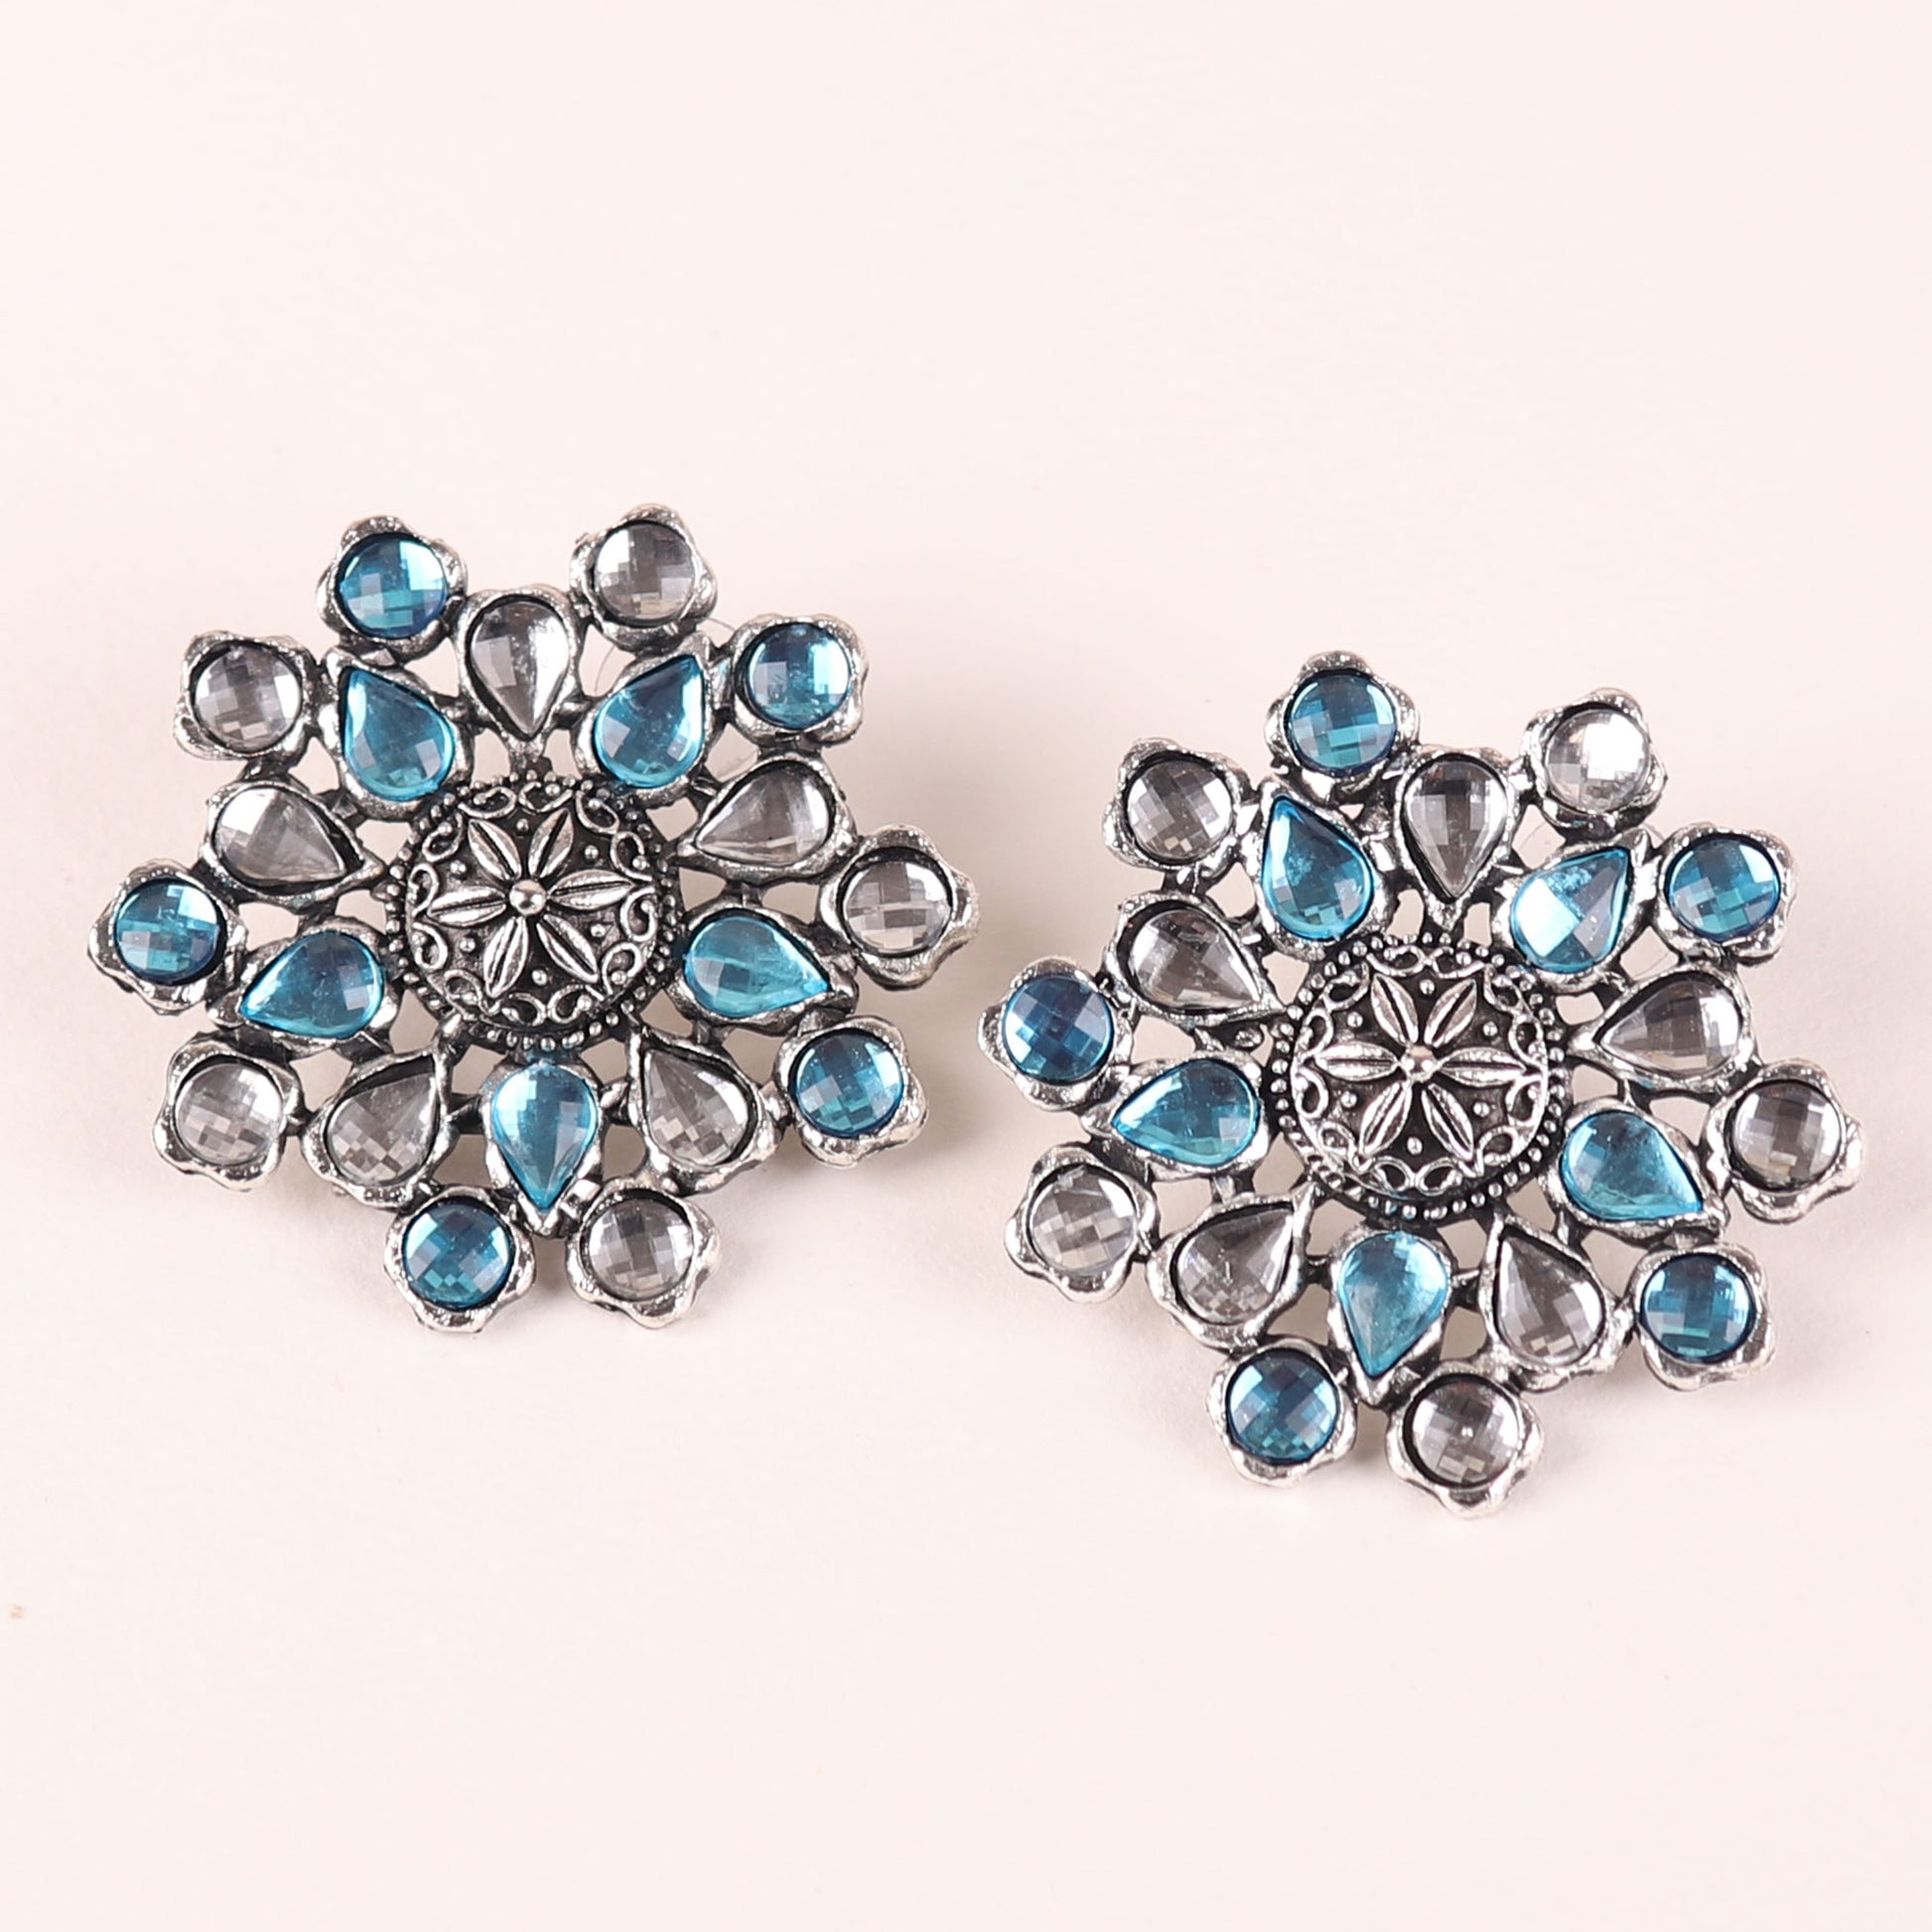 Earrings,The Pearl Hive Studs in Turquoise Blue - Cippele Multi Store